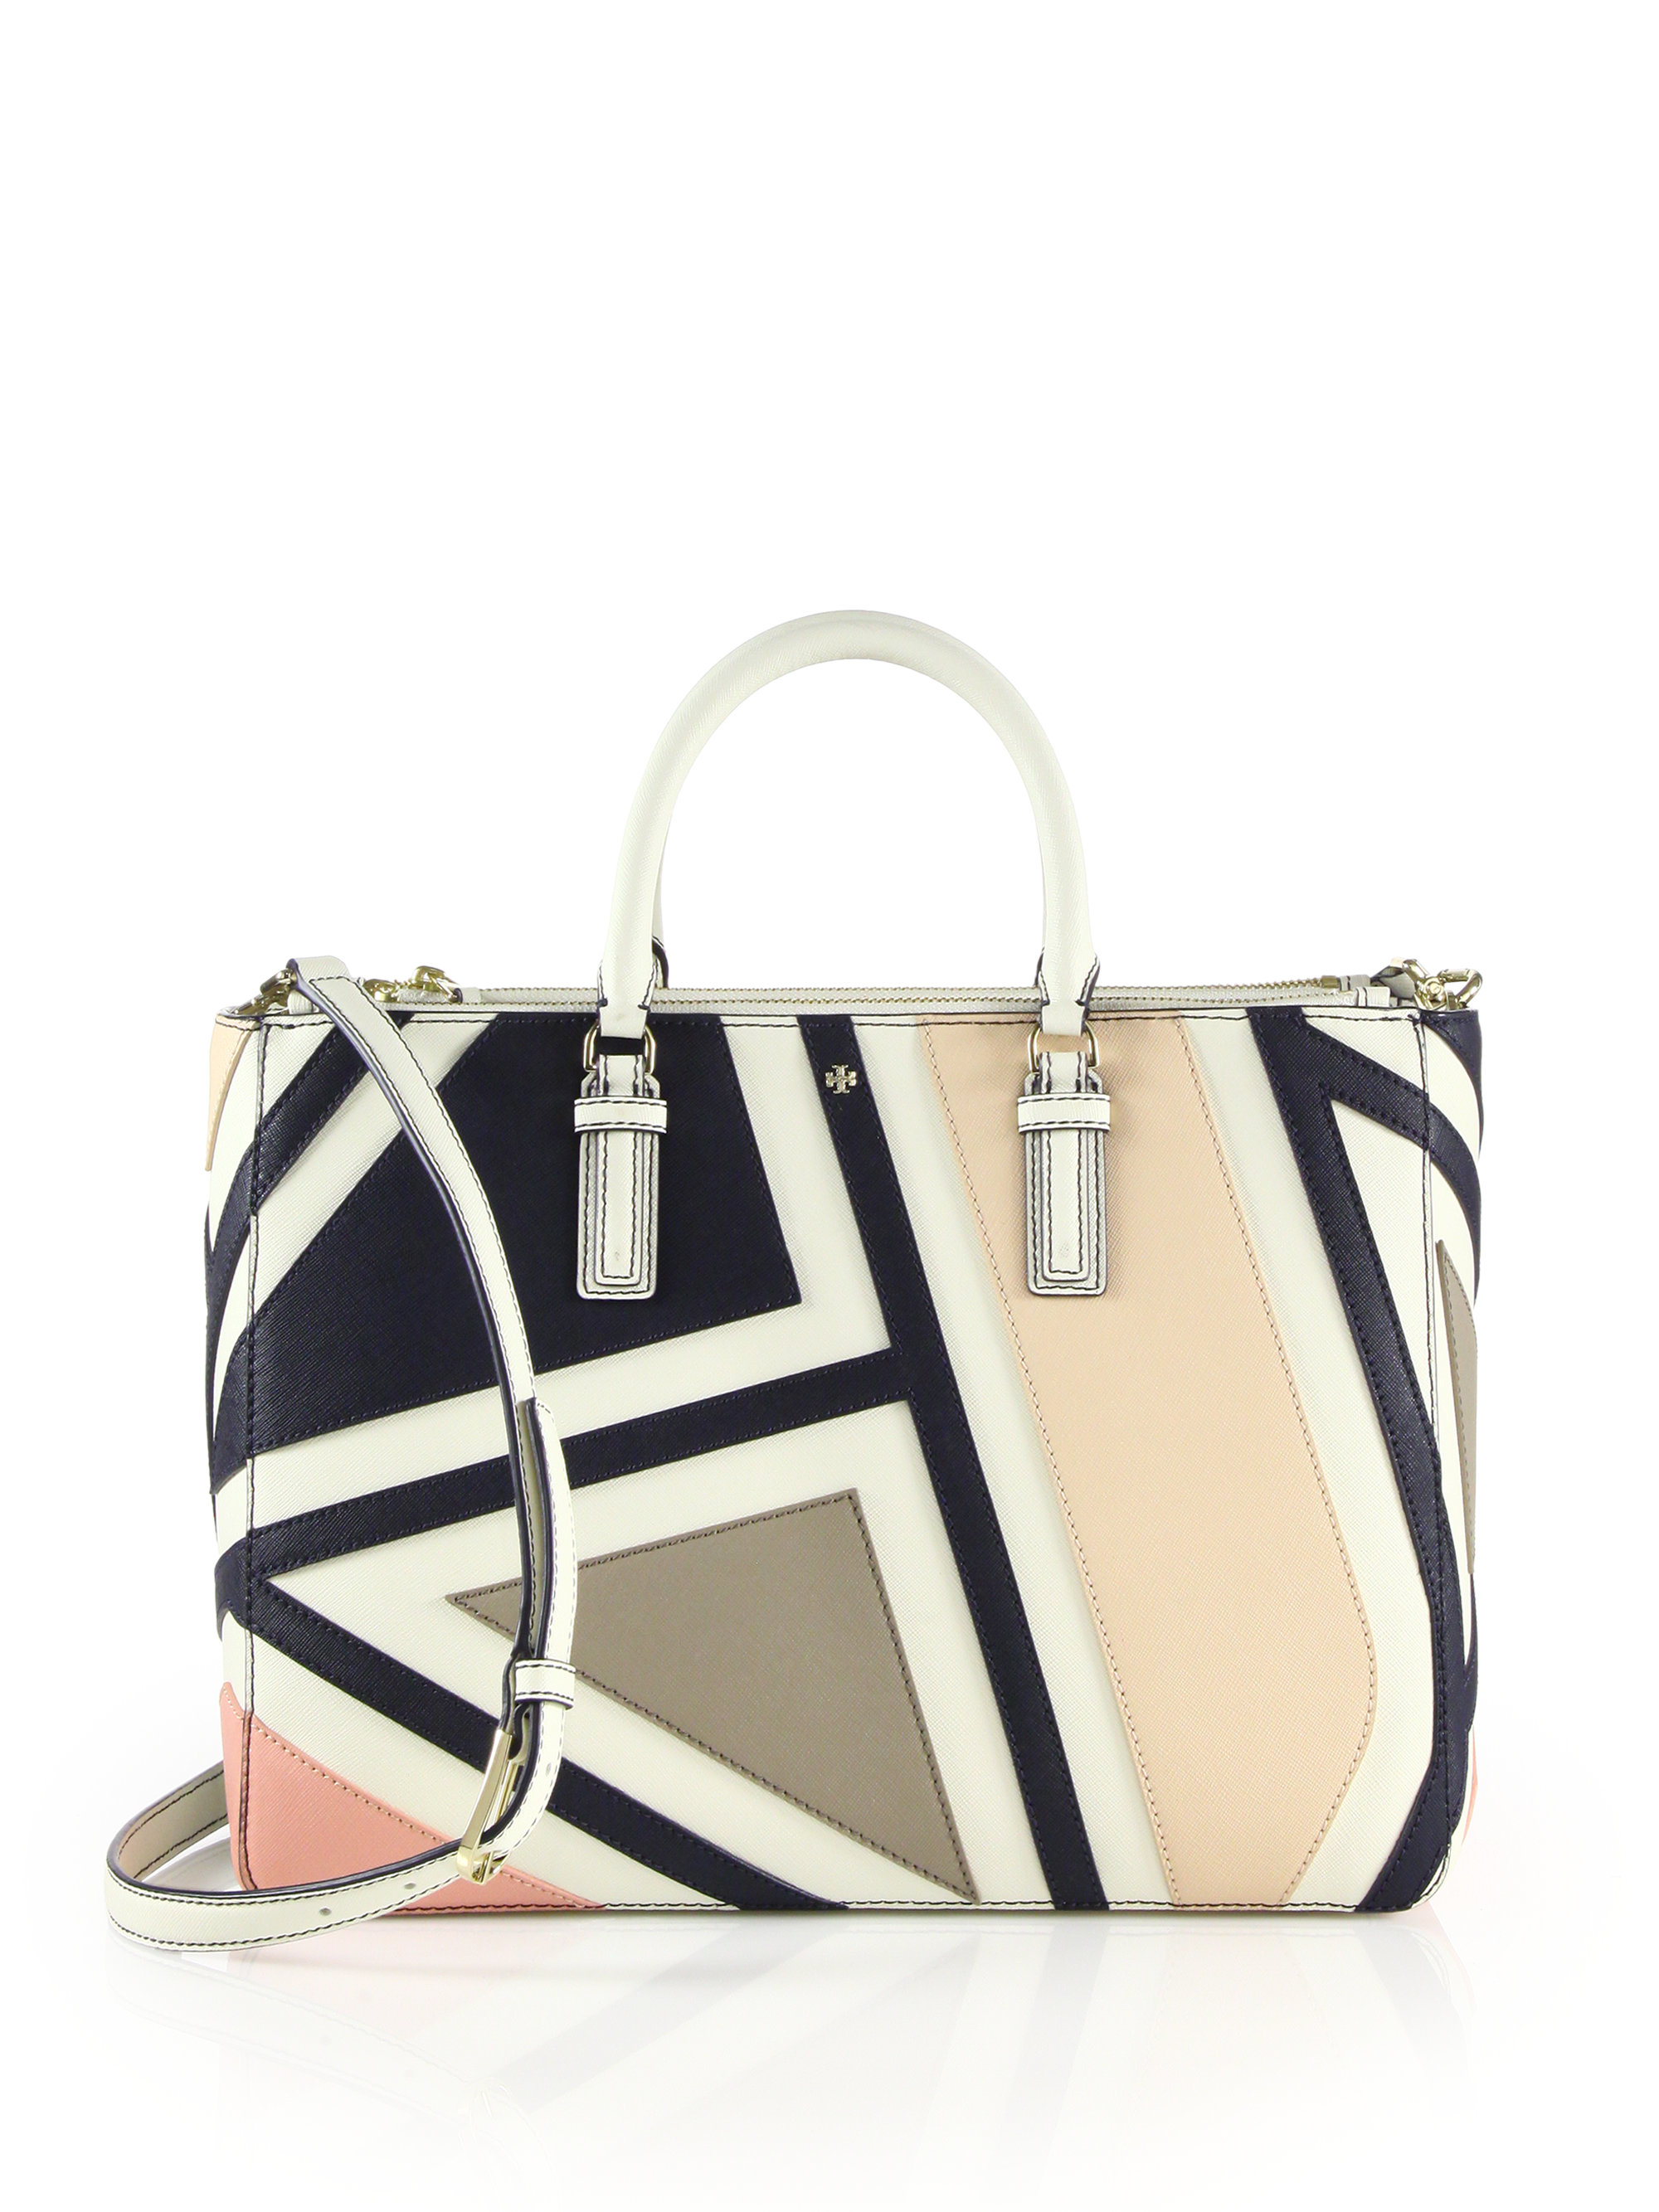 Lyst - Tory Burch Robinson Fret-patchwork Multicolor Saffiano Leather Tote in White